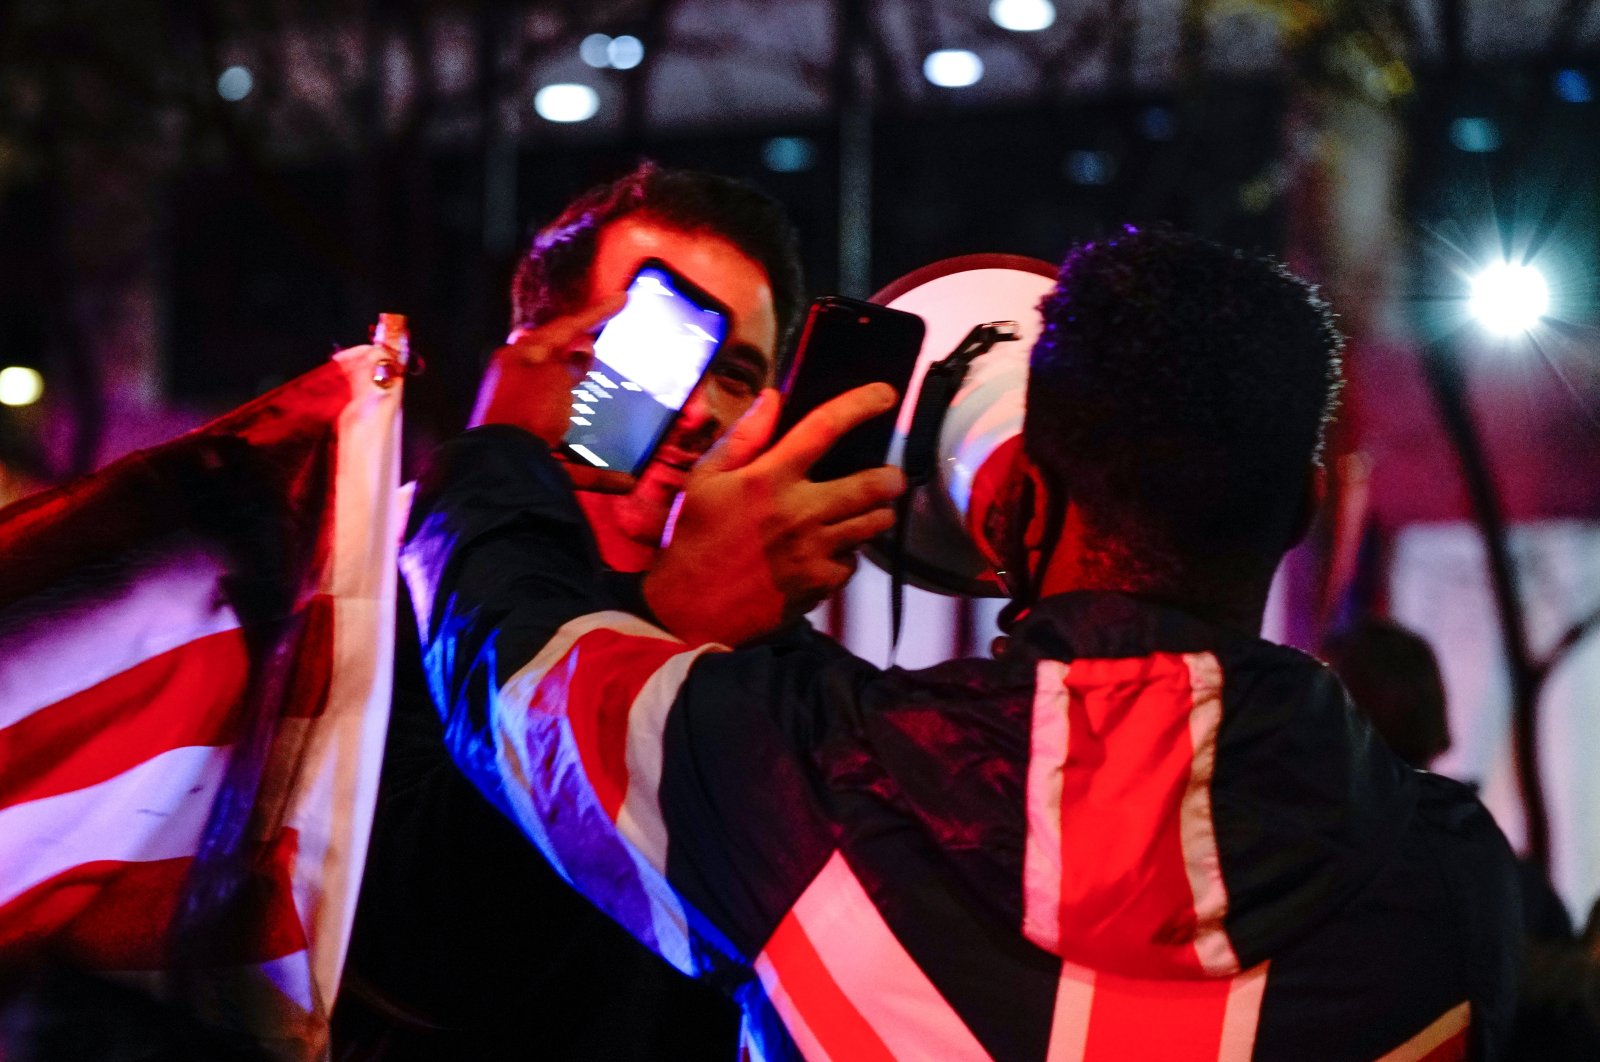 A supporter of U.S. President Donald Trump and a Black Lives Matter (BLM) counterprotester film each other with their mobile phones as they argue at a "Stop the Steal" protest outside Milwaukee Central Count the day after Milwaukee County finished counting absentee ballots, in Milwaukee, Wisconsin, U.S. Nov. 5, 2020. (Reuters Photo)